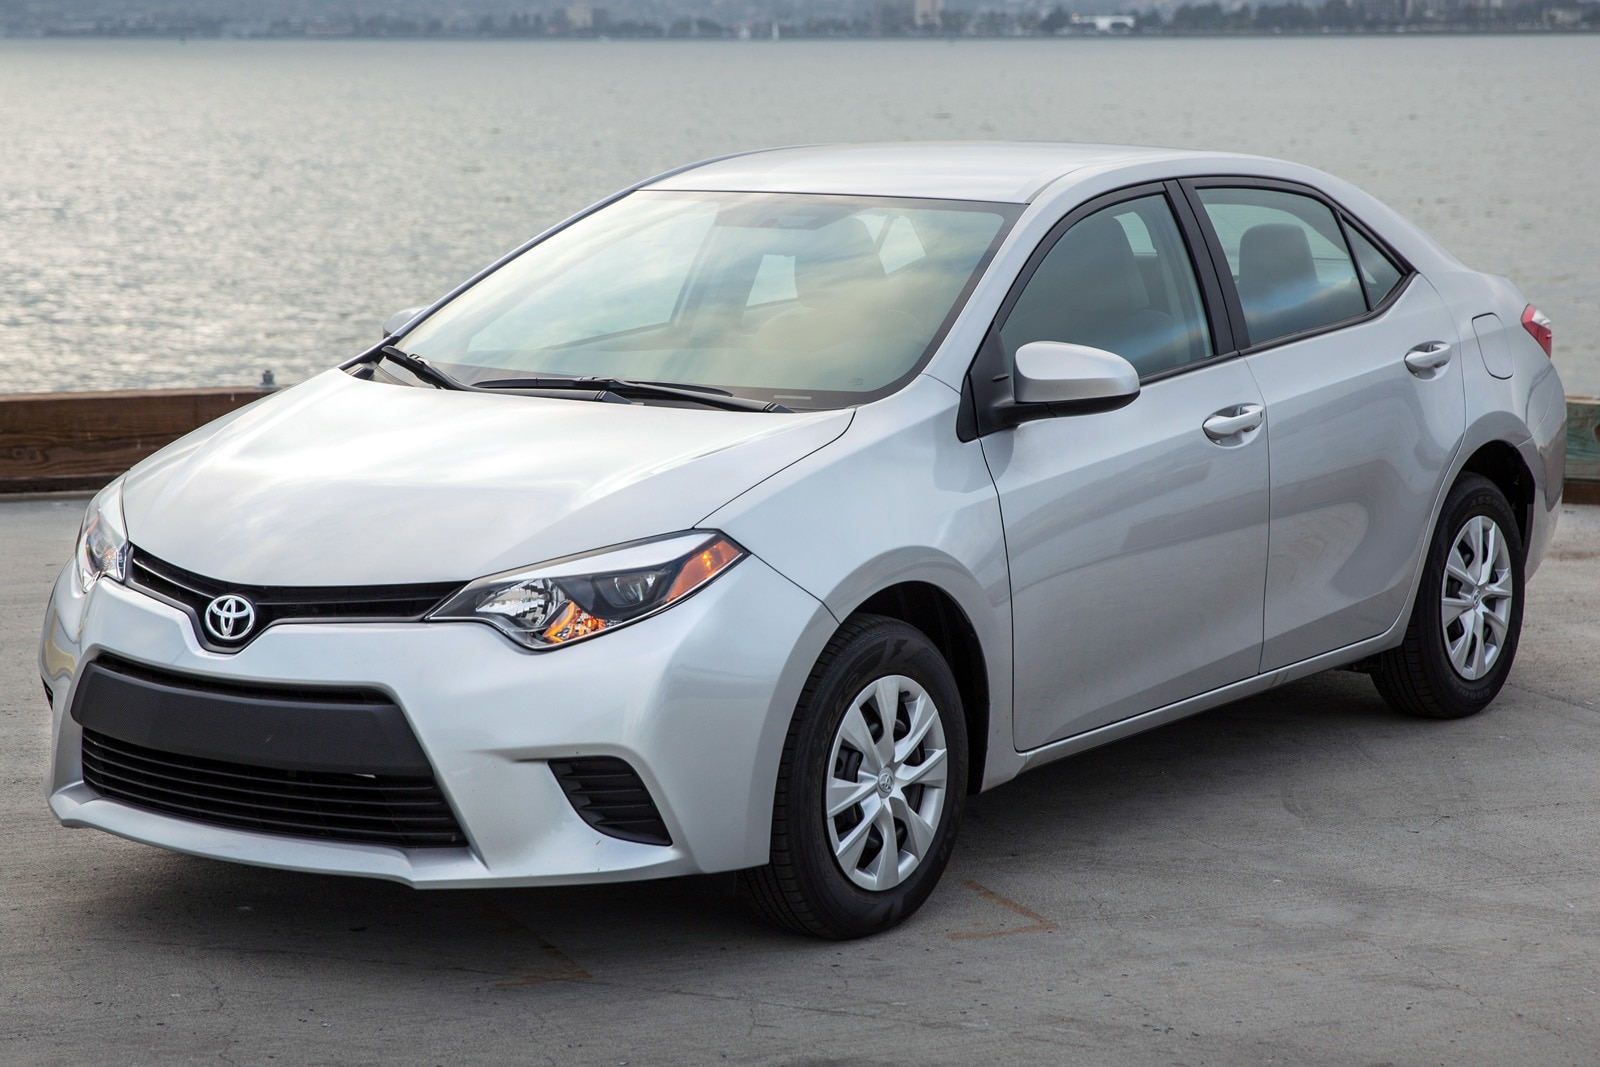 2016 Toyota Corolla Review & Ratings | Edmunds